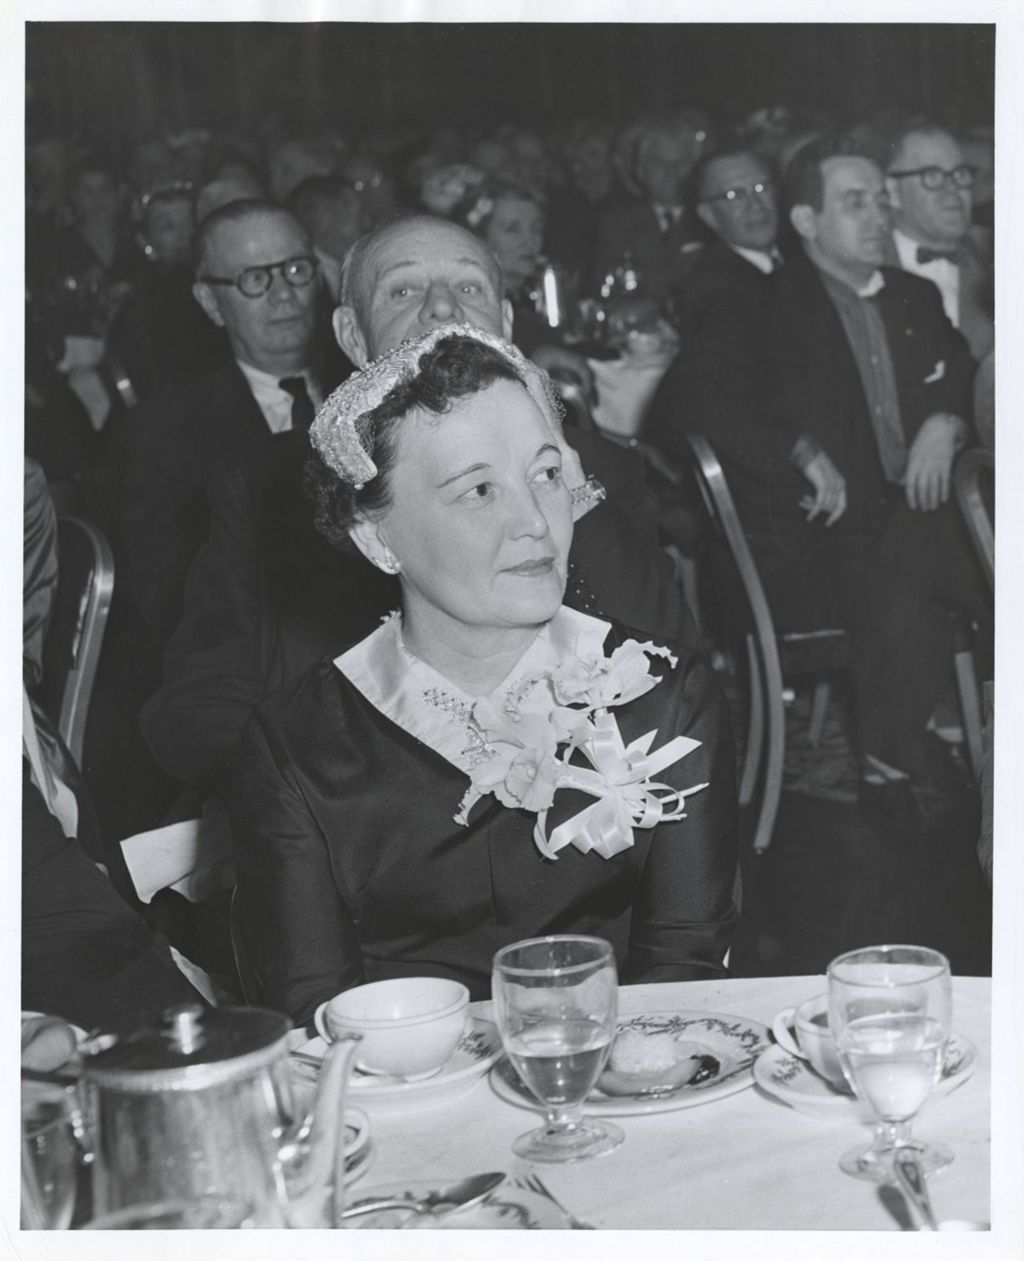 Miniature of Eleanor Daley at a dining event